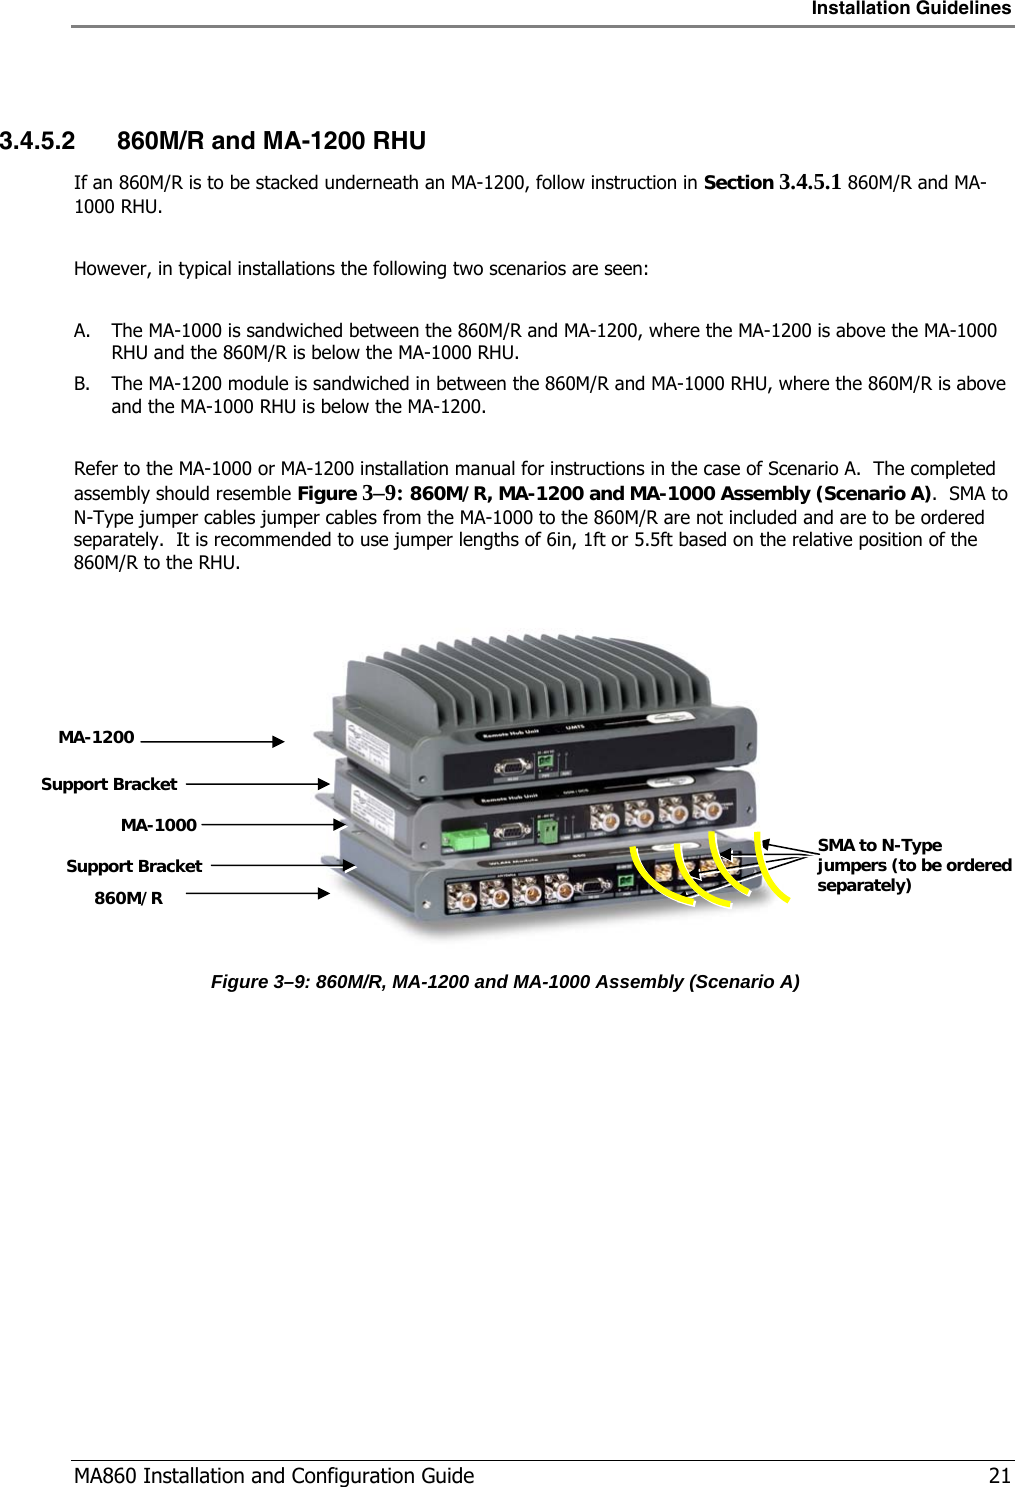 Installation Guidelines  MA860 Installation and Configuration Guide   21  3.4.5.2 860M/R and MA-1200 RHU If an 860M/R is to be stacked underneath an MA-1200, follow instruction in Section  3.4.5.1 860M/R and MA-1000 RHU.  However, in typical installations the following two scenarios are seen:  A. The MA-1000 is sandwiched between the 860M/R and MA-1200, where the MA-1200 is above the MA-1000 RHU and the 860M/R is below the MA-1000 RHU. B. The MA-1200 module is sandwiched in between the 860M/R and MA-1000 RHU, where the 860M/R is above and the MA-1000 RHU is below the MA-1200.  Refer to the MA-1000 or MA-1200 installation manual for instructions in the case of Scenario A.  The completed assembly should resemble Figure  3–9: 860M/R, MA-1200 and MA-1000 Assembly (Scenario A).  SMA to N-Type jumper cables jumper cables from the MA-1000 to the 860M/R are not included and are to be ordered separately.  It is recommended to use jumper lengths of 6in, 1ft or 5.5ft based on the relative position of the 860M/R to the RHU.   Figure  3–9: 860M/R, MA-1200 and MA-1000 Assembly (Scenario A)  MA-1200 860M/R Support Bracket Support Bracket MA-1000  SMA to N-Type jumpers (to be ordered separately) 